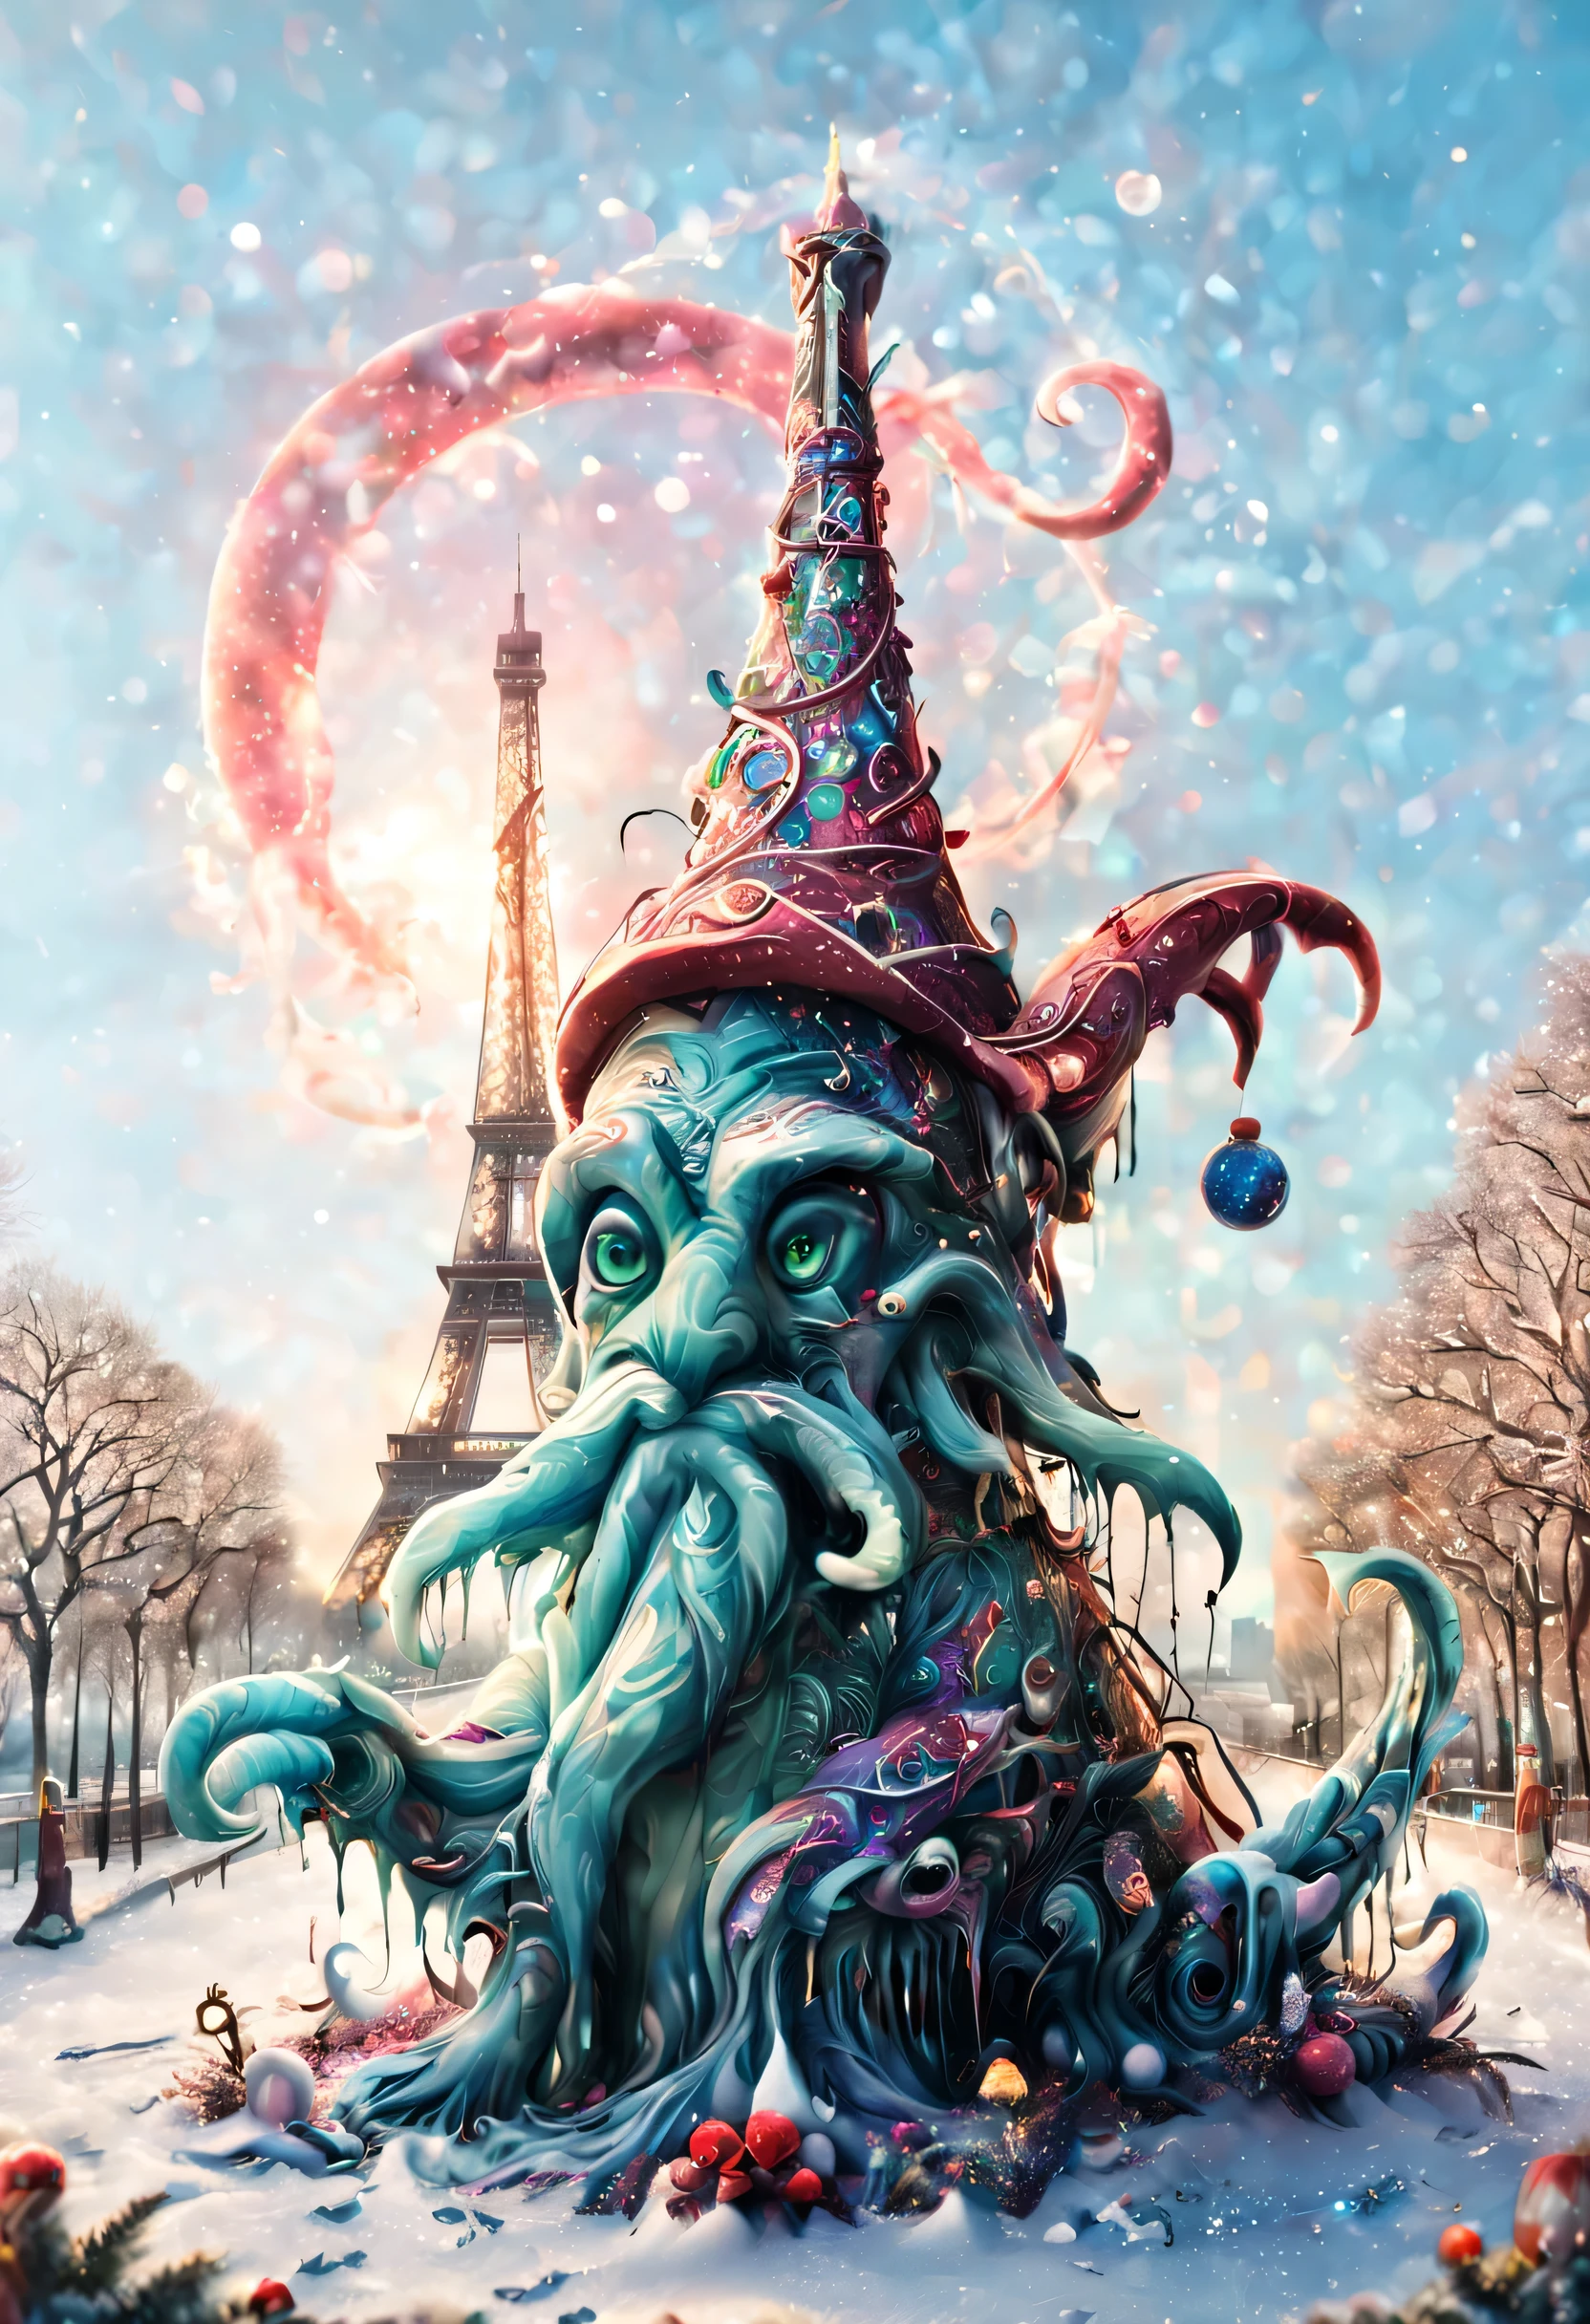 Create a surreal magical image featuring Kraken in Santa's hat, looking in camera. Behind him is the Eiffel tower in a bright daylight. An artistic sign that reads Eiffel is in the foreground. Nice winter landscape on background. Eiffel tower is covered with color lights and glitter. 